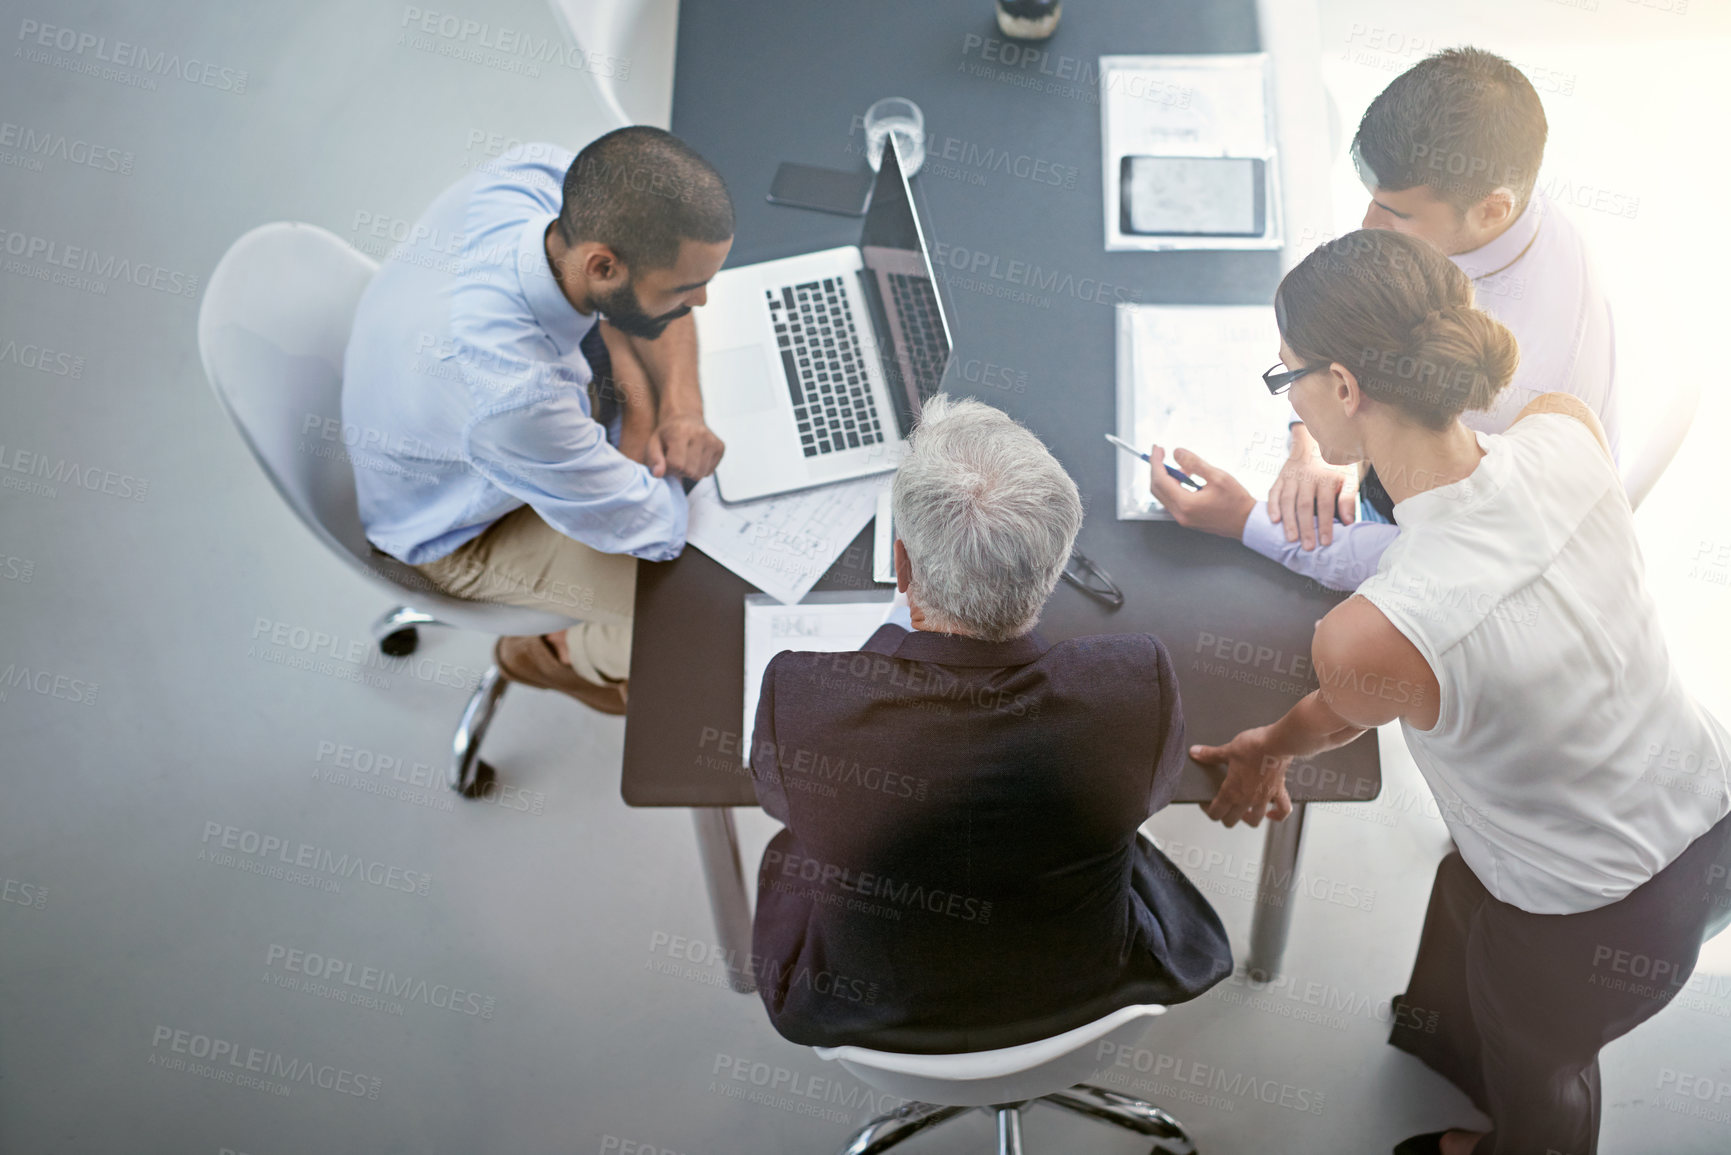 Buy stock photo Shot of corporate businesspeople having a meeting in an office